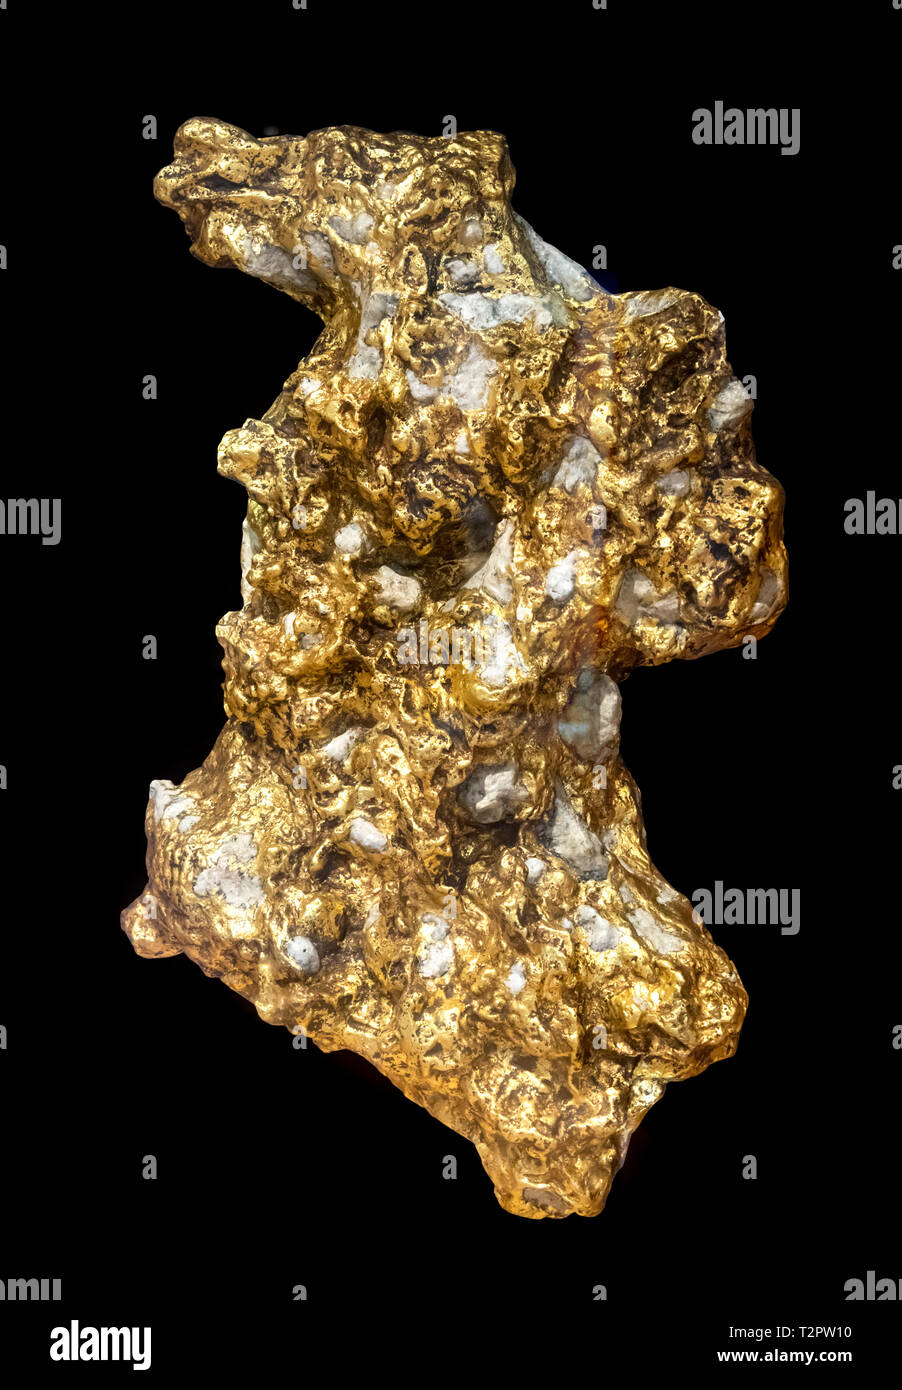 World's largest gold nugget. Replica of The Welcome Stranger, a gold nugget weighing 2,284 oz (see note below), in Moliagul, Victoria, Australia in February 1869. The nugget was broken before